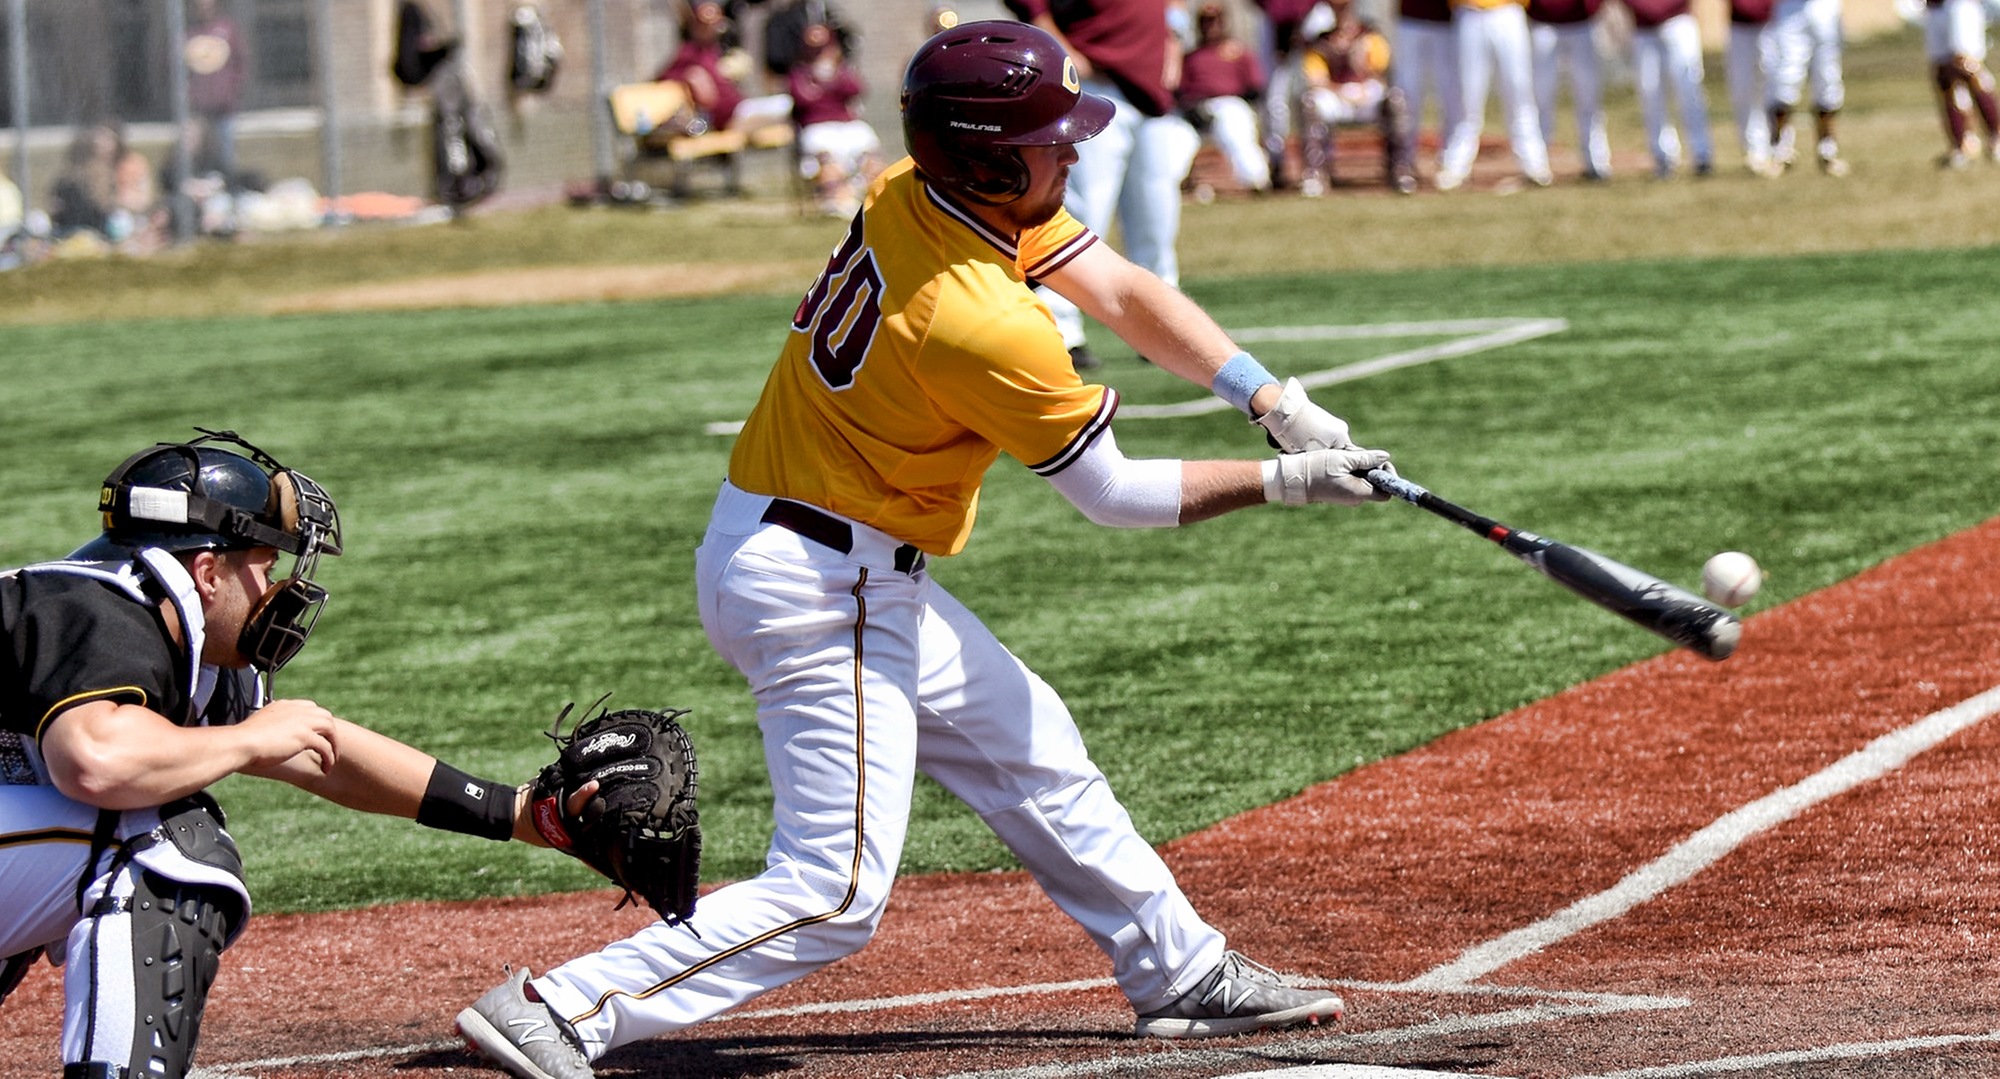 Jake Stilwell connects for a single during Game 1 to extend his hitting streak to five games.